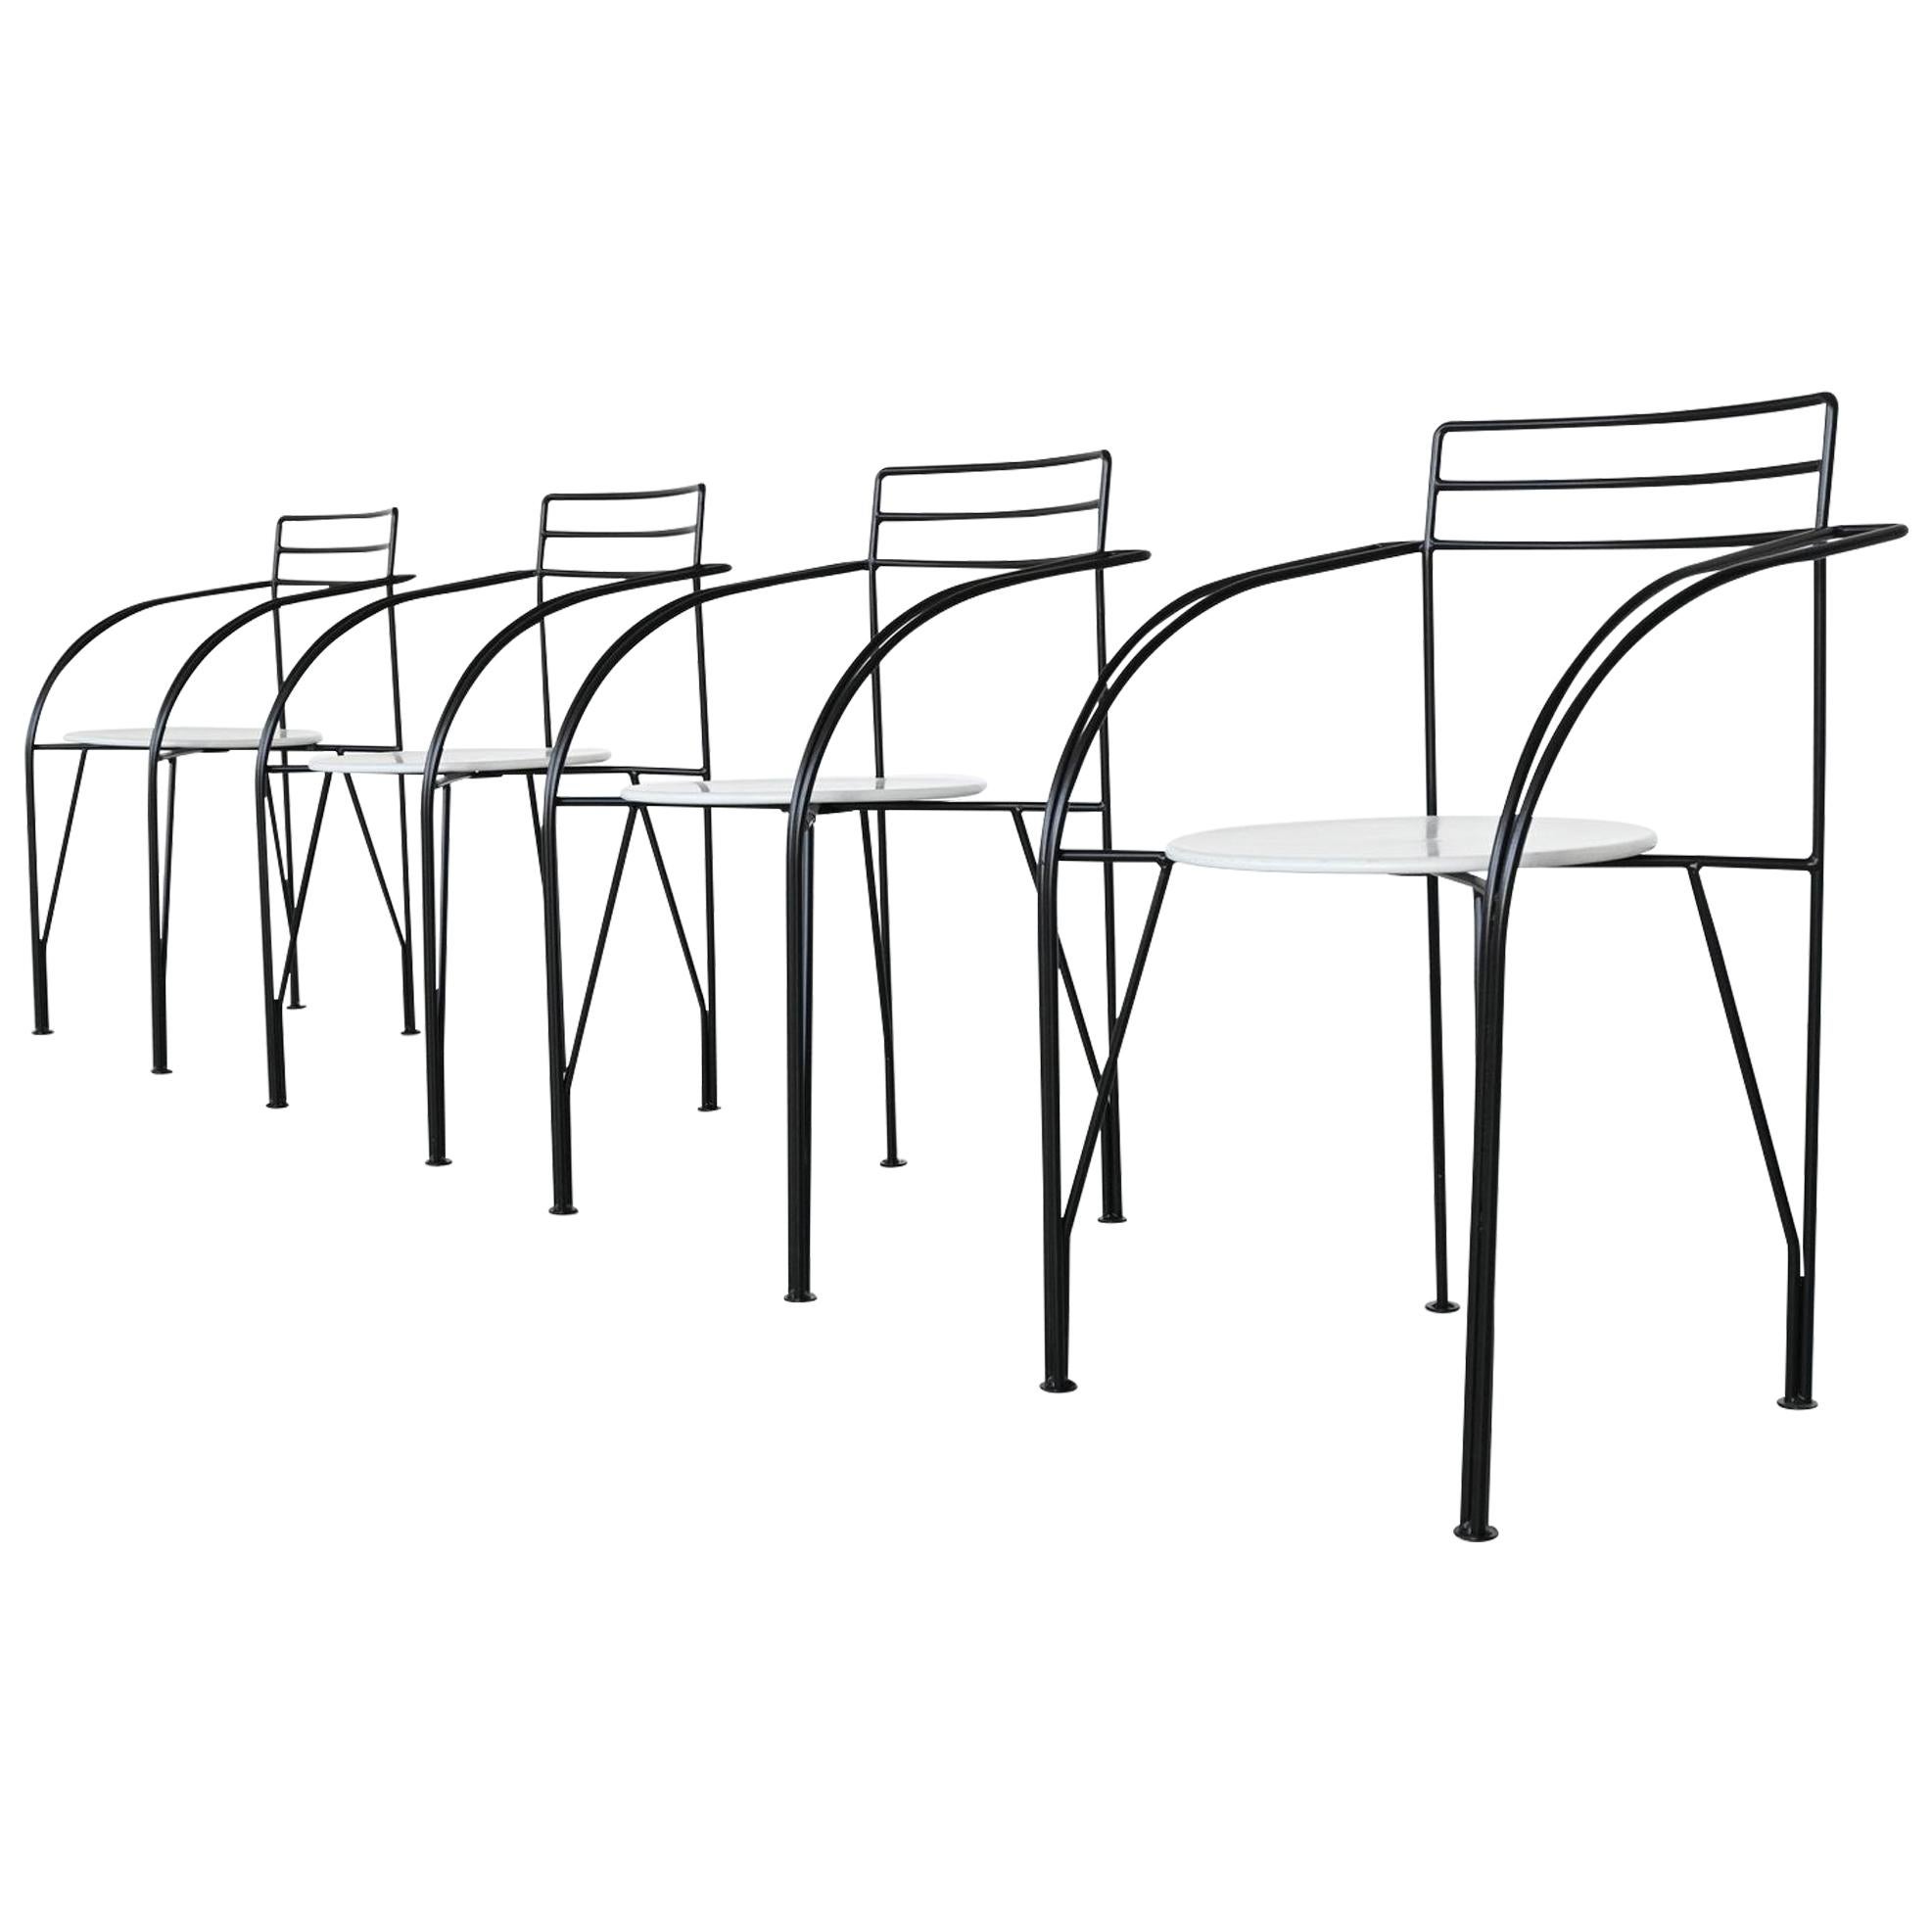 Pascal Mourgue Silver Moon Dining Chairs Fermob, France, 1985